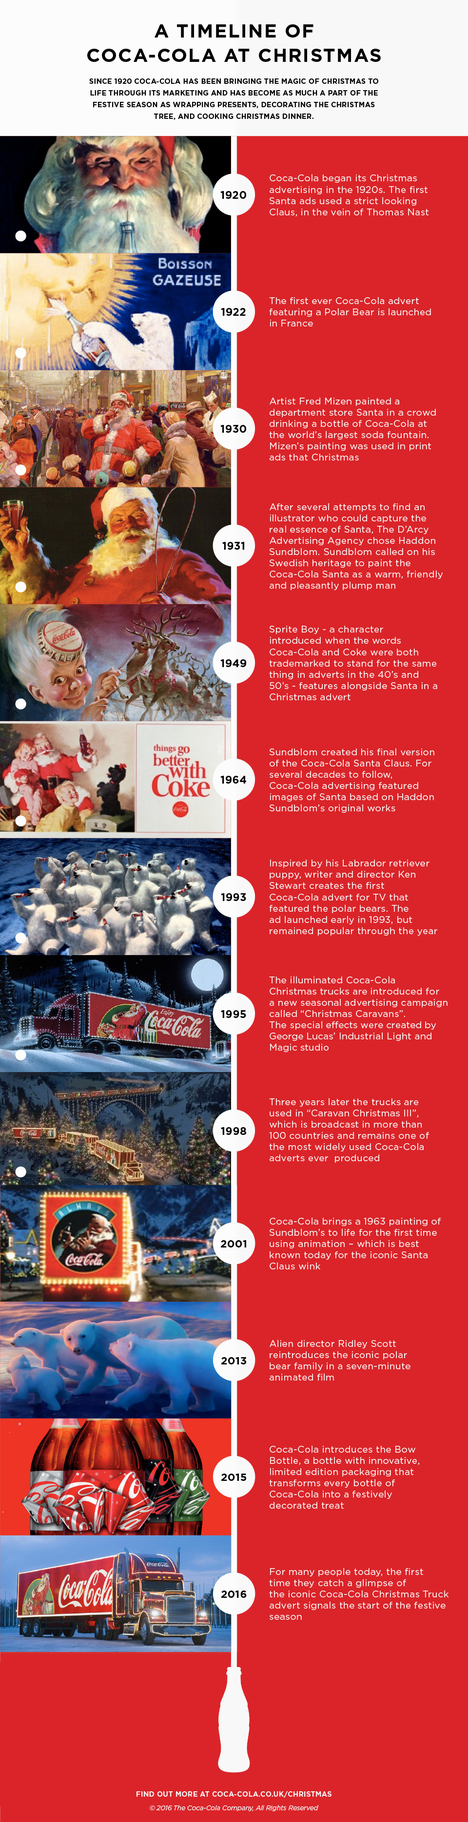 A Timeline of Coca-Cola at Christmas